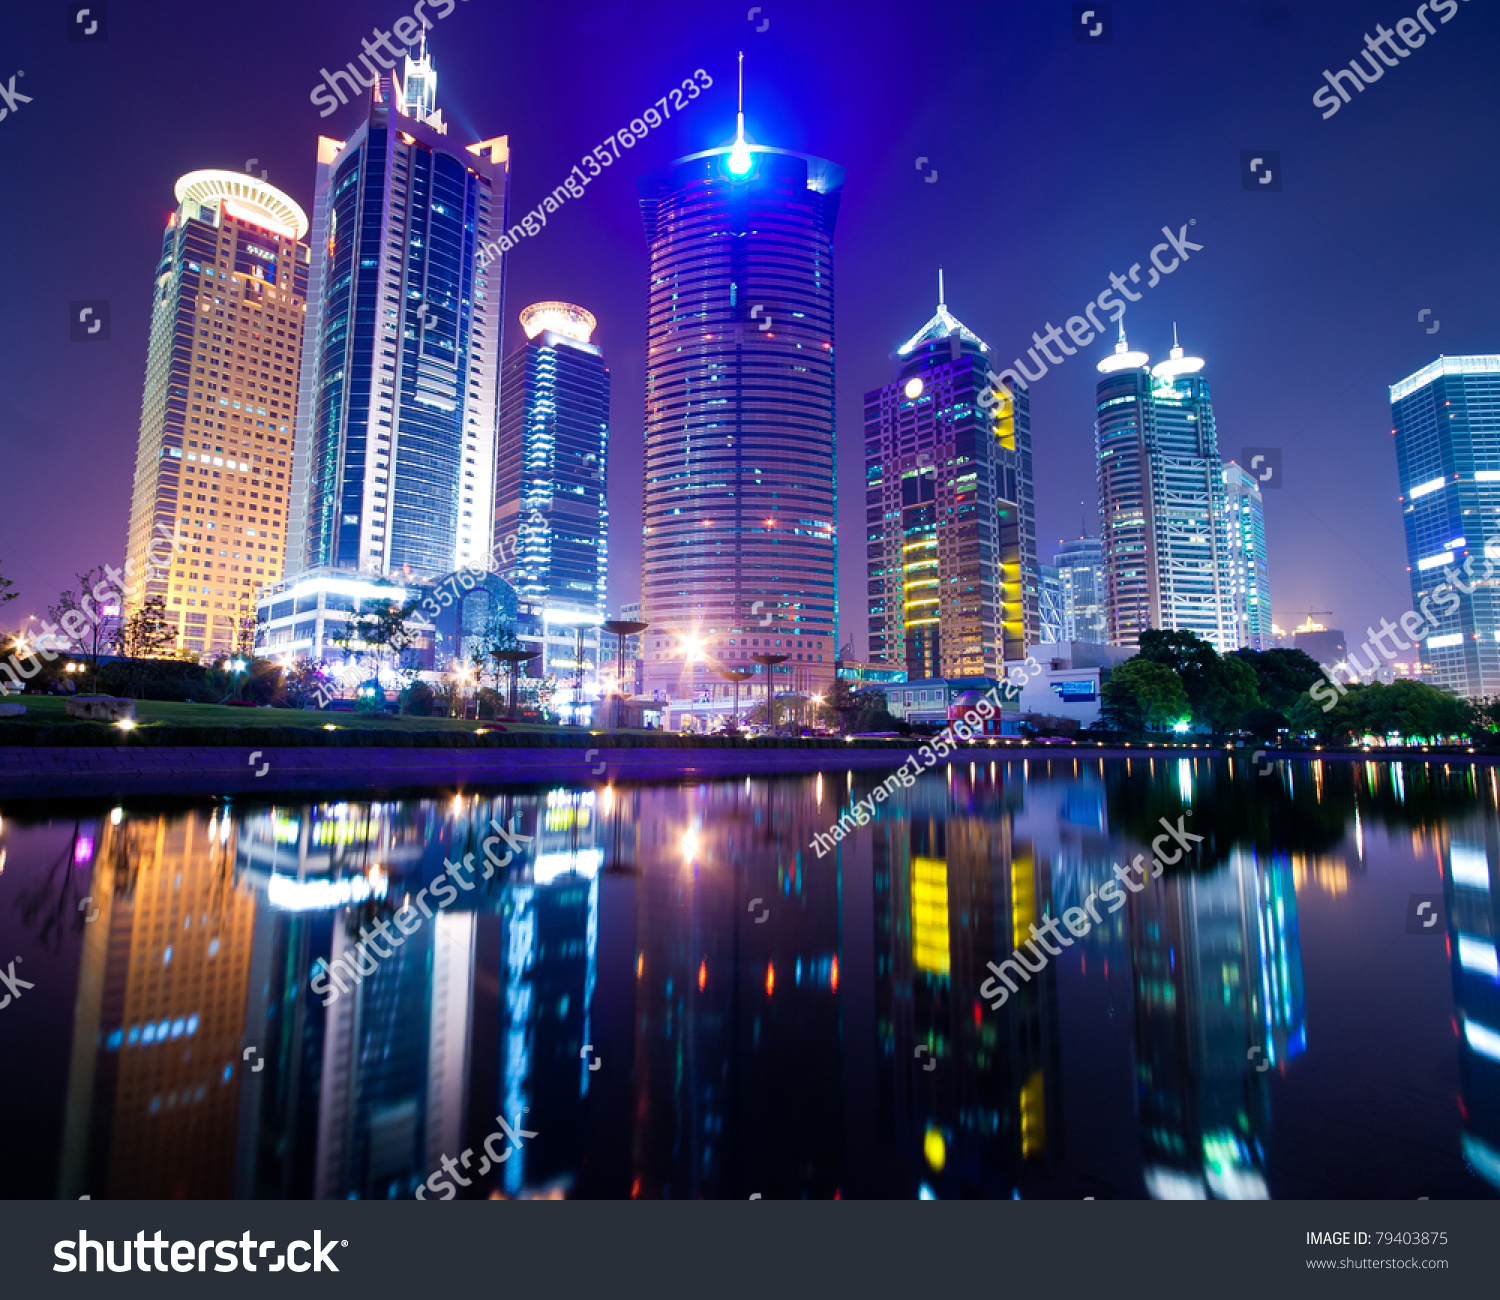 the night view of the lujiazui financial centre in shanghai china. #79403875